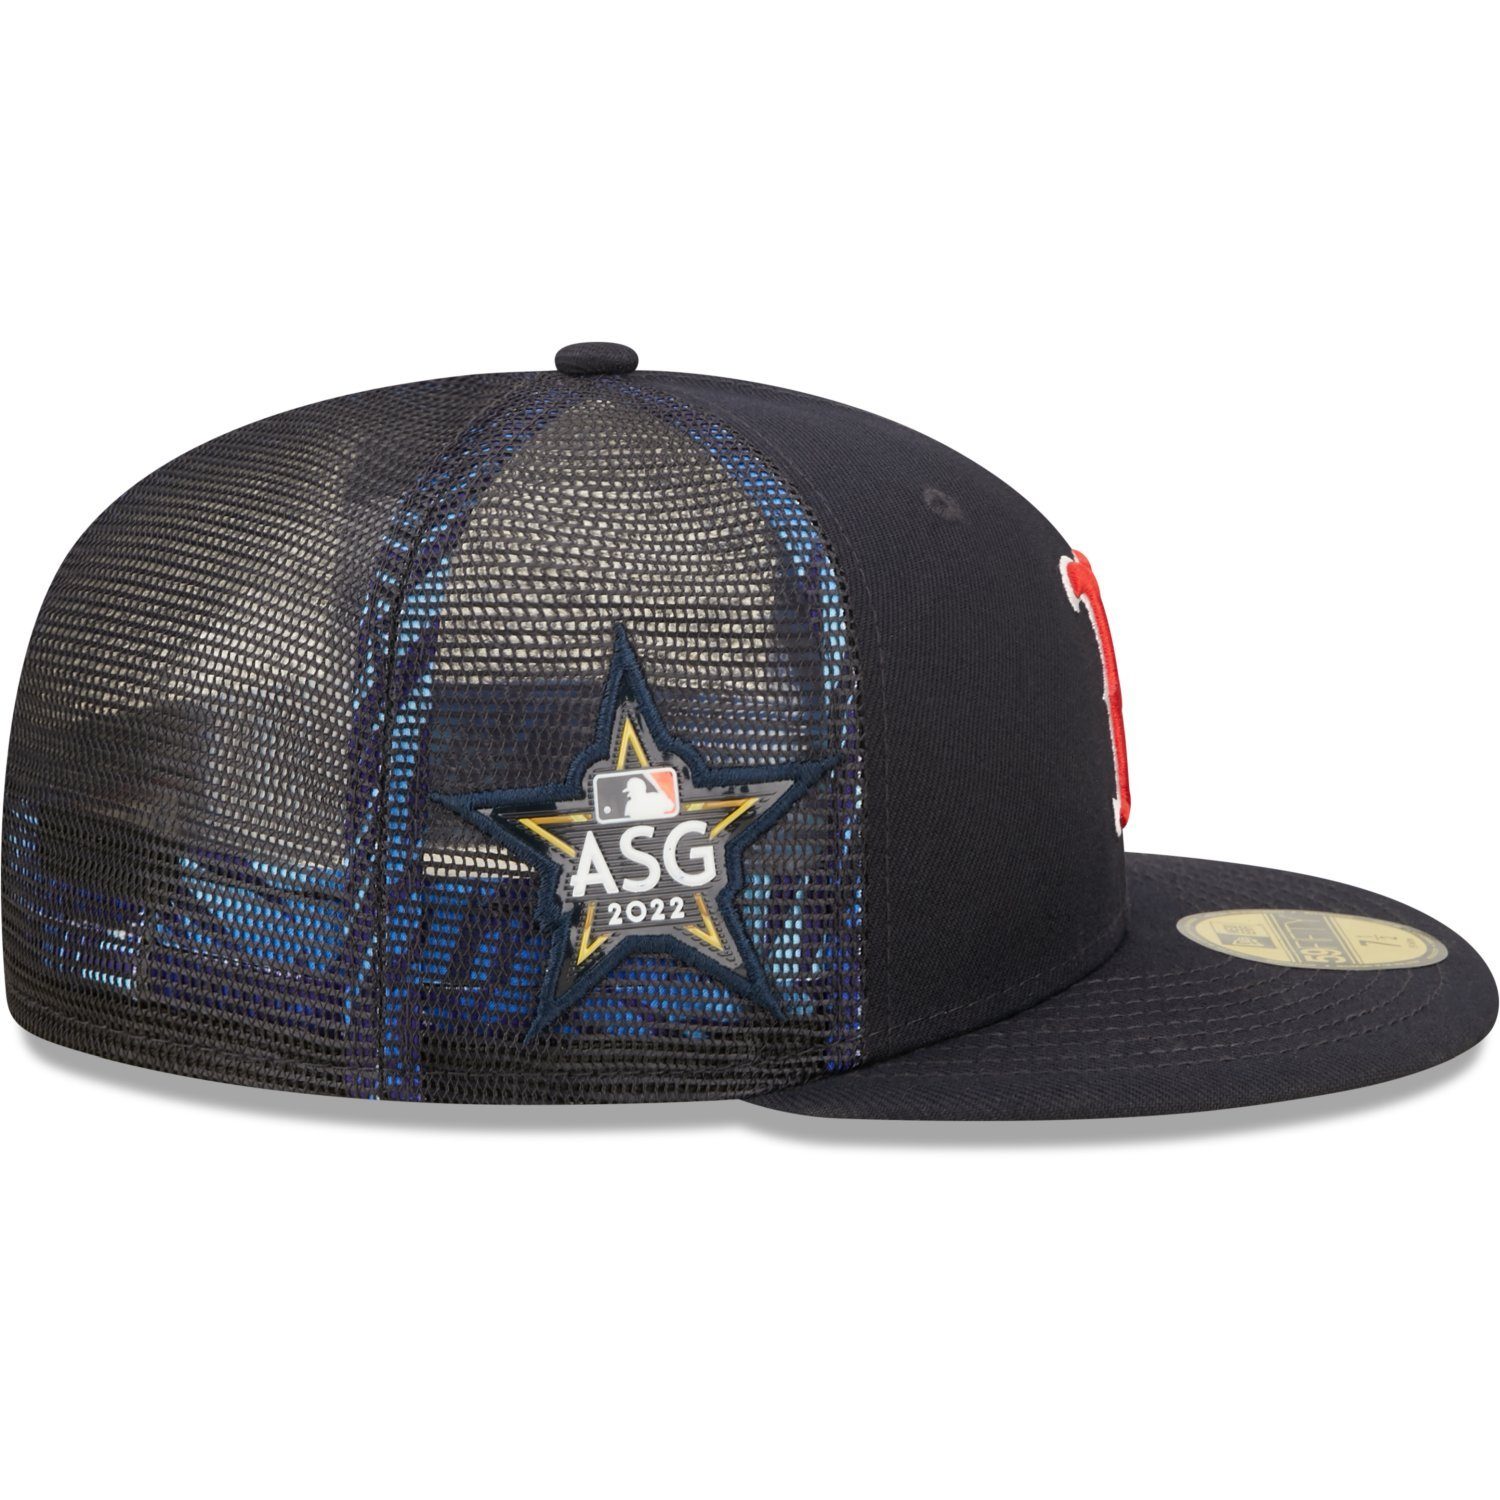 ALLSTAR Boston New Sox GAME Fitted Cap Era Red 59Fifty